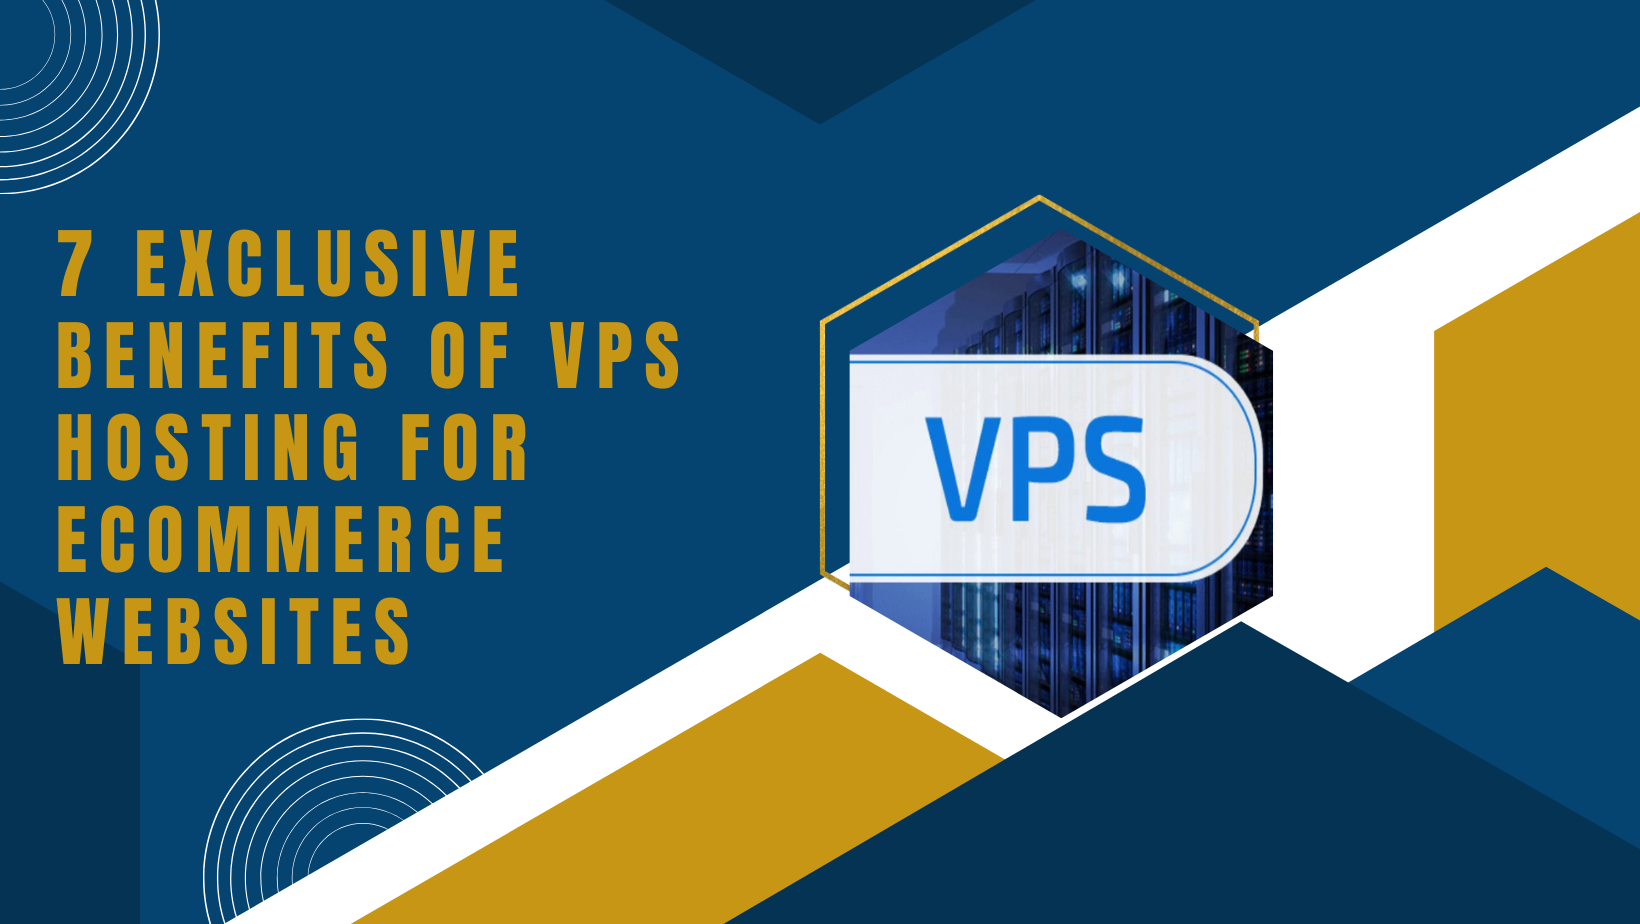 7 exclusive benefits of VPS hosting for eCommerce websites